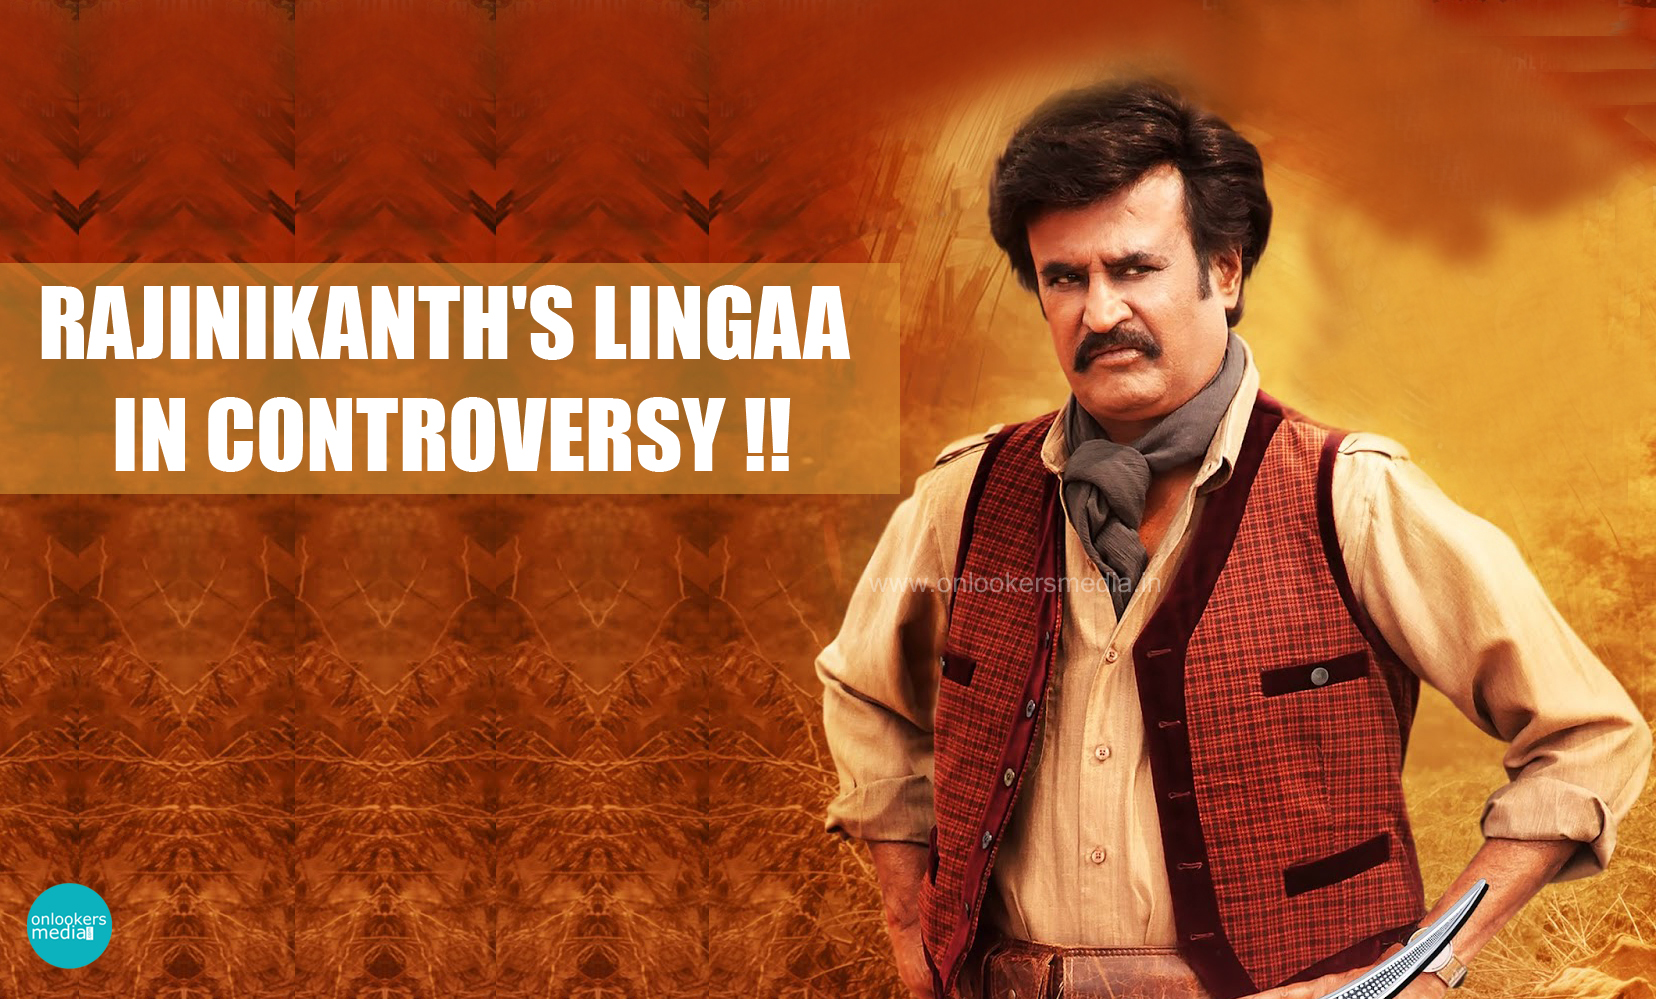 Rajinikanth's Lingaa in controversy-Mullaperiyar issue-Lingaa Review-Report-Collection-Sonakshi Sinha-Onlookers Media